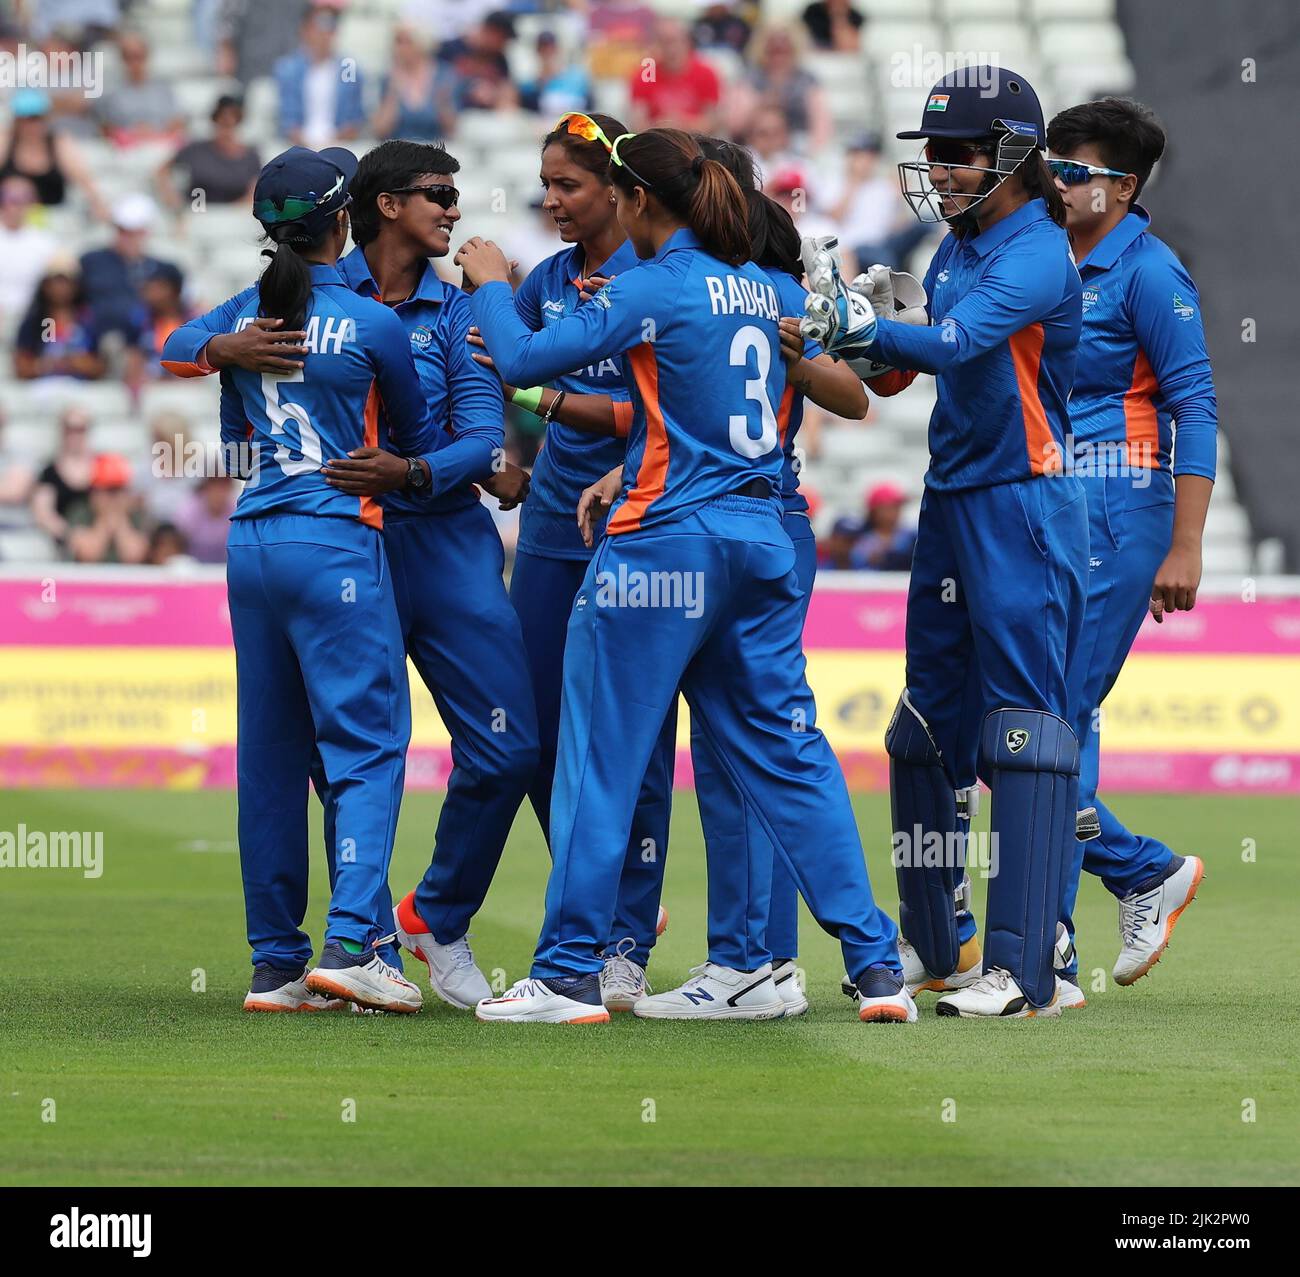 Egsbaston, Birmingham, UK 29th July 2022 Womens T20 Cricket Match between India and Australia; Australia won by 3 wickets inspite of excellent performance by Indian women players